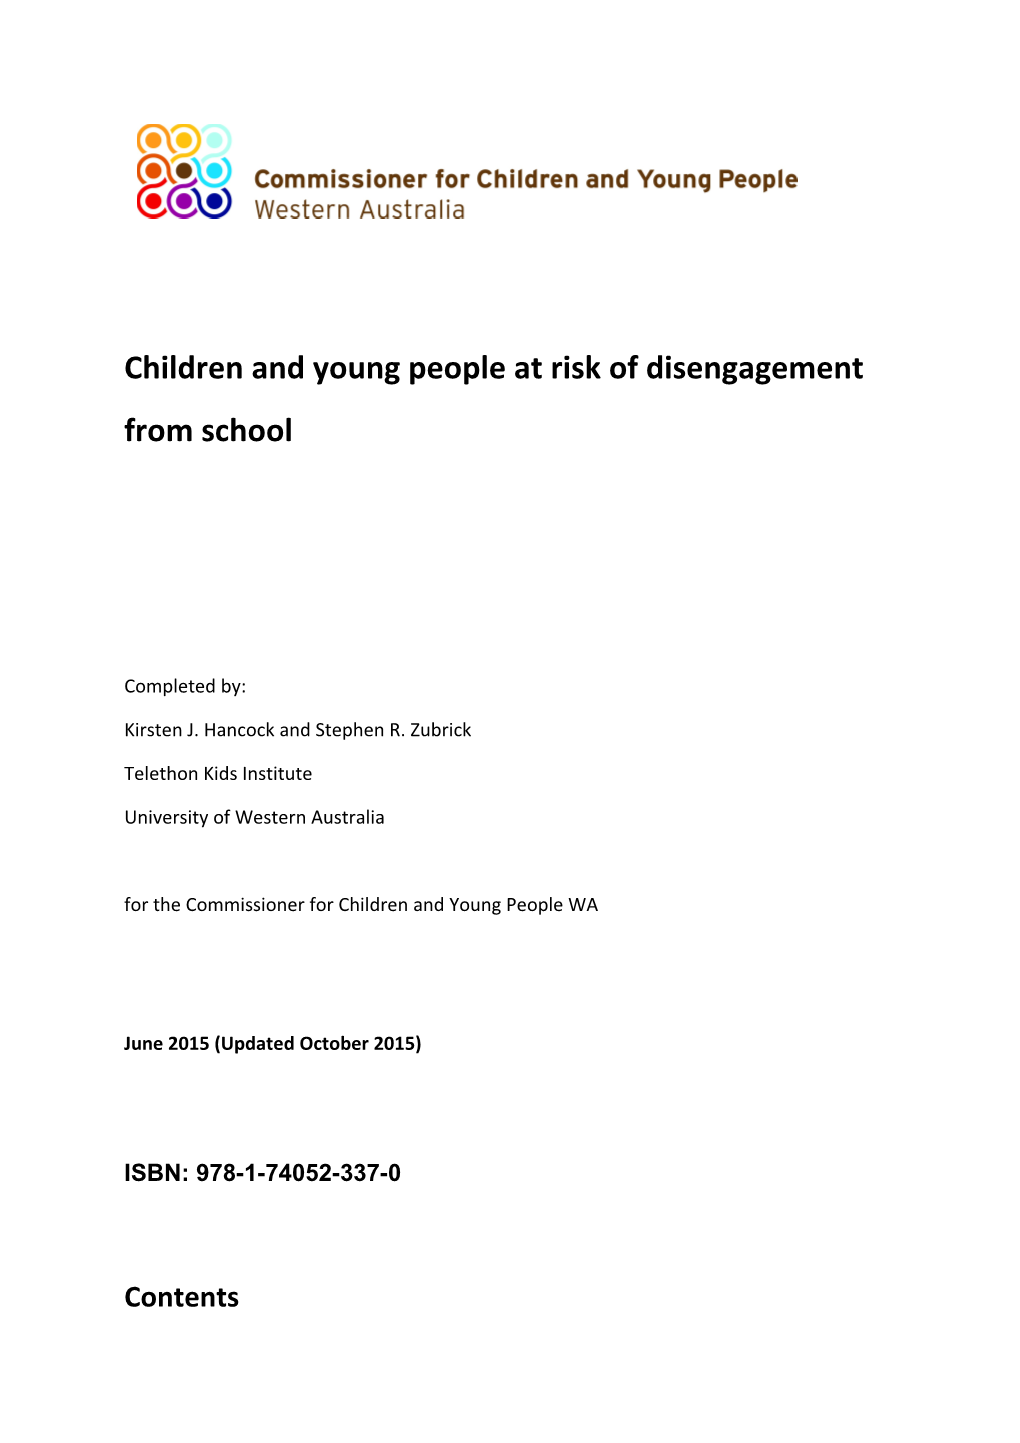 Children and Young People at Risk of Disengagement from School